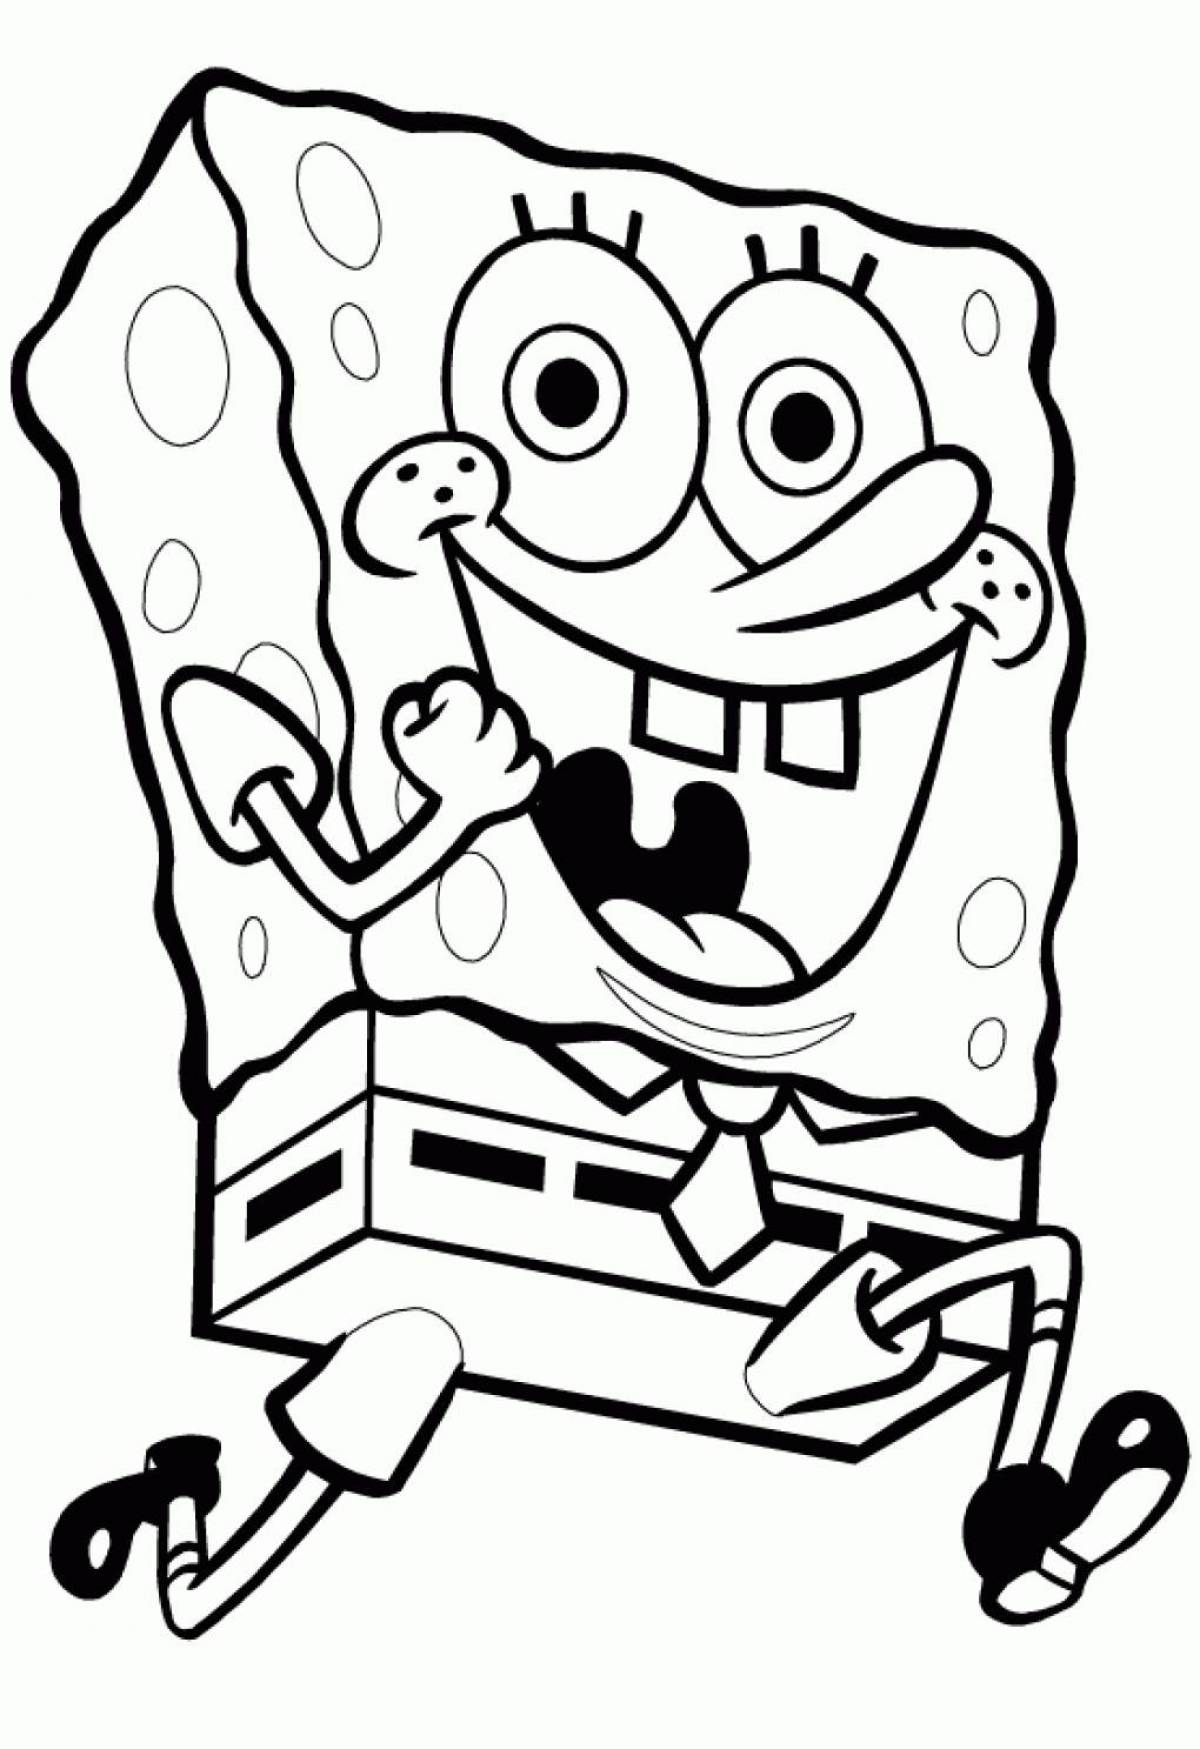 Sweet spongebob coloring pages for kids